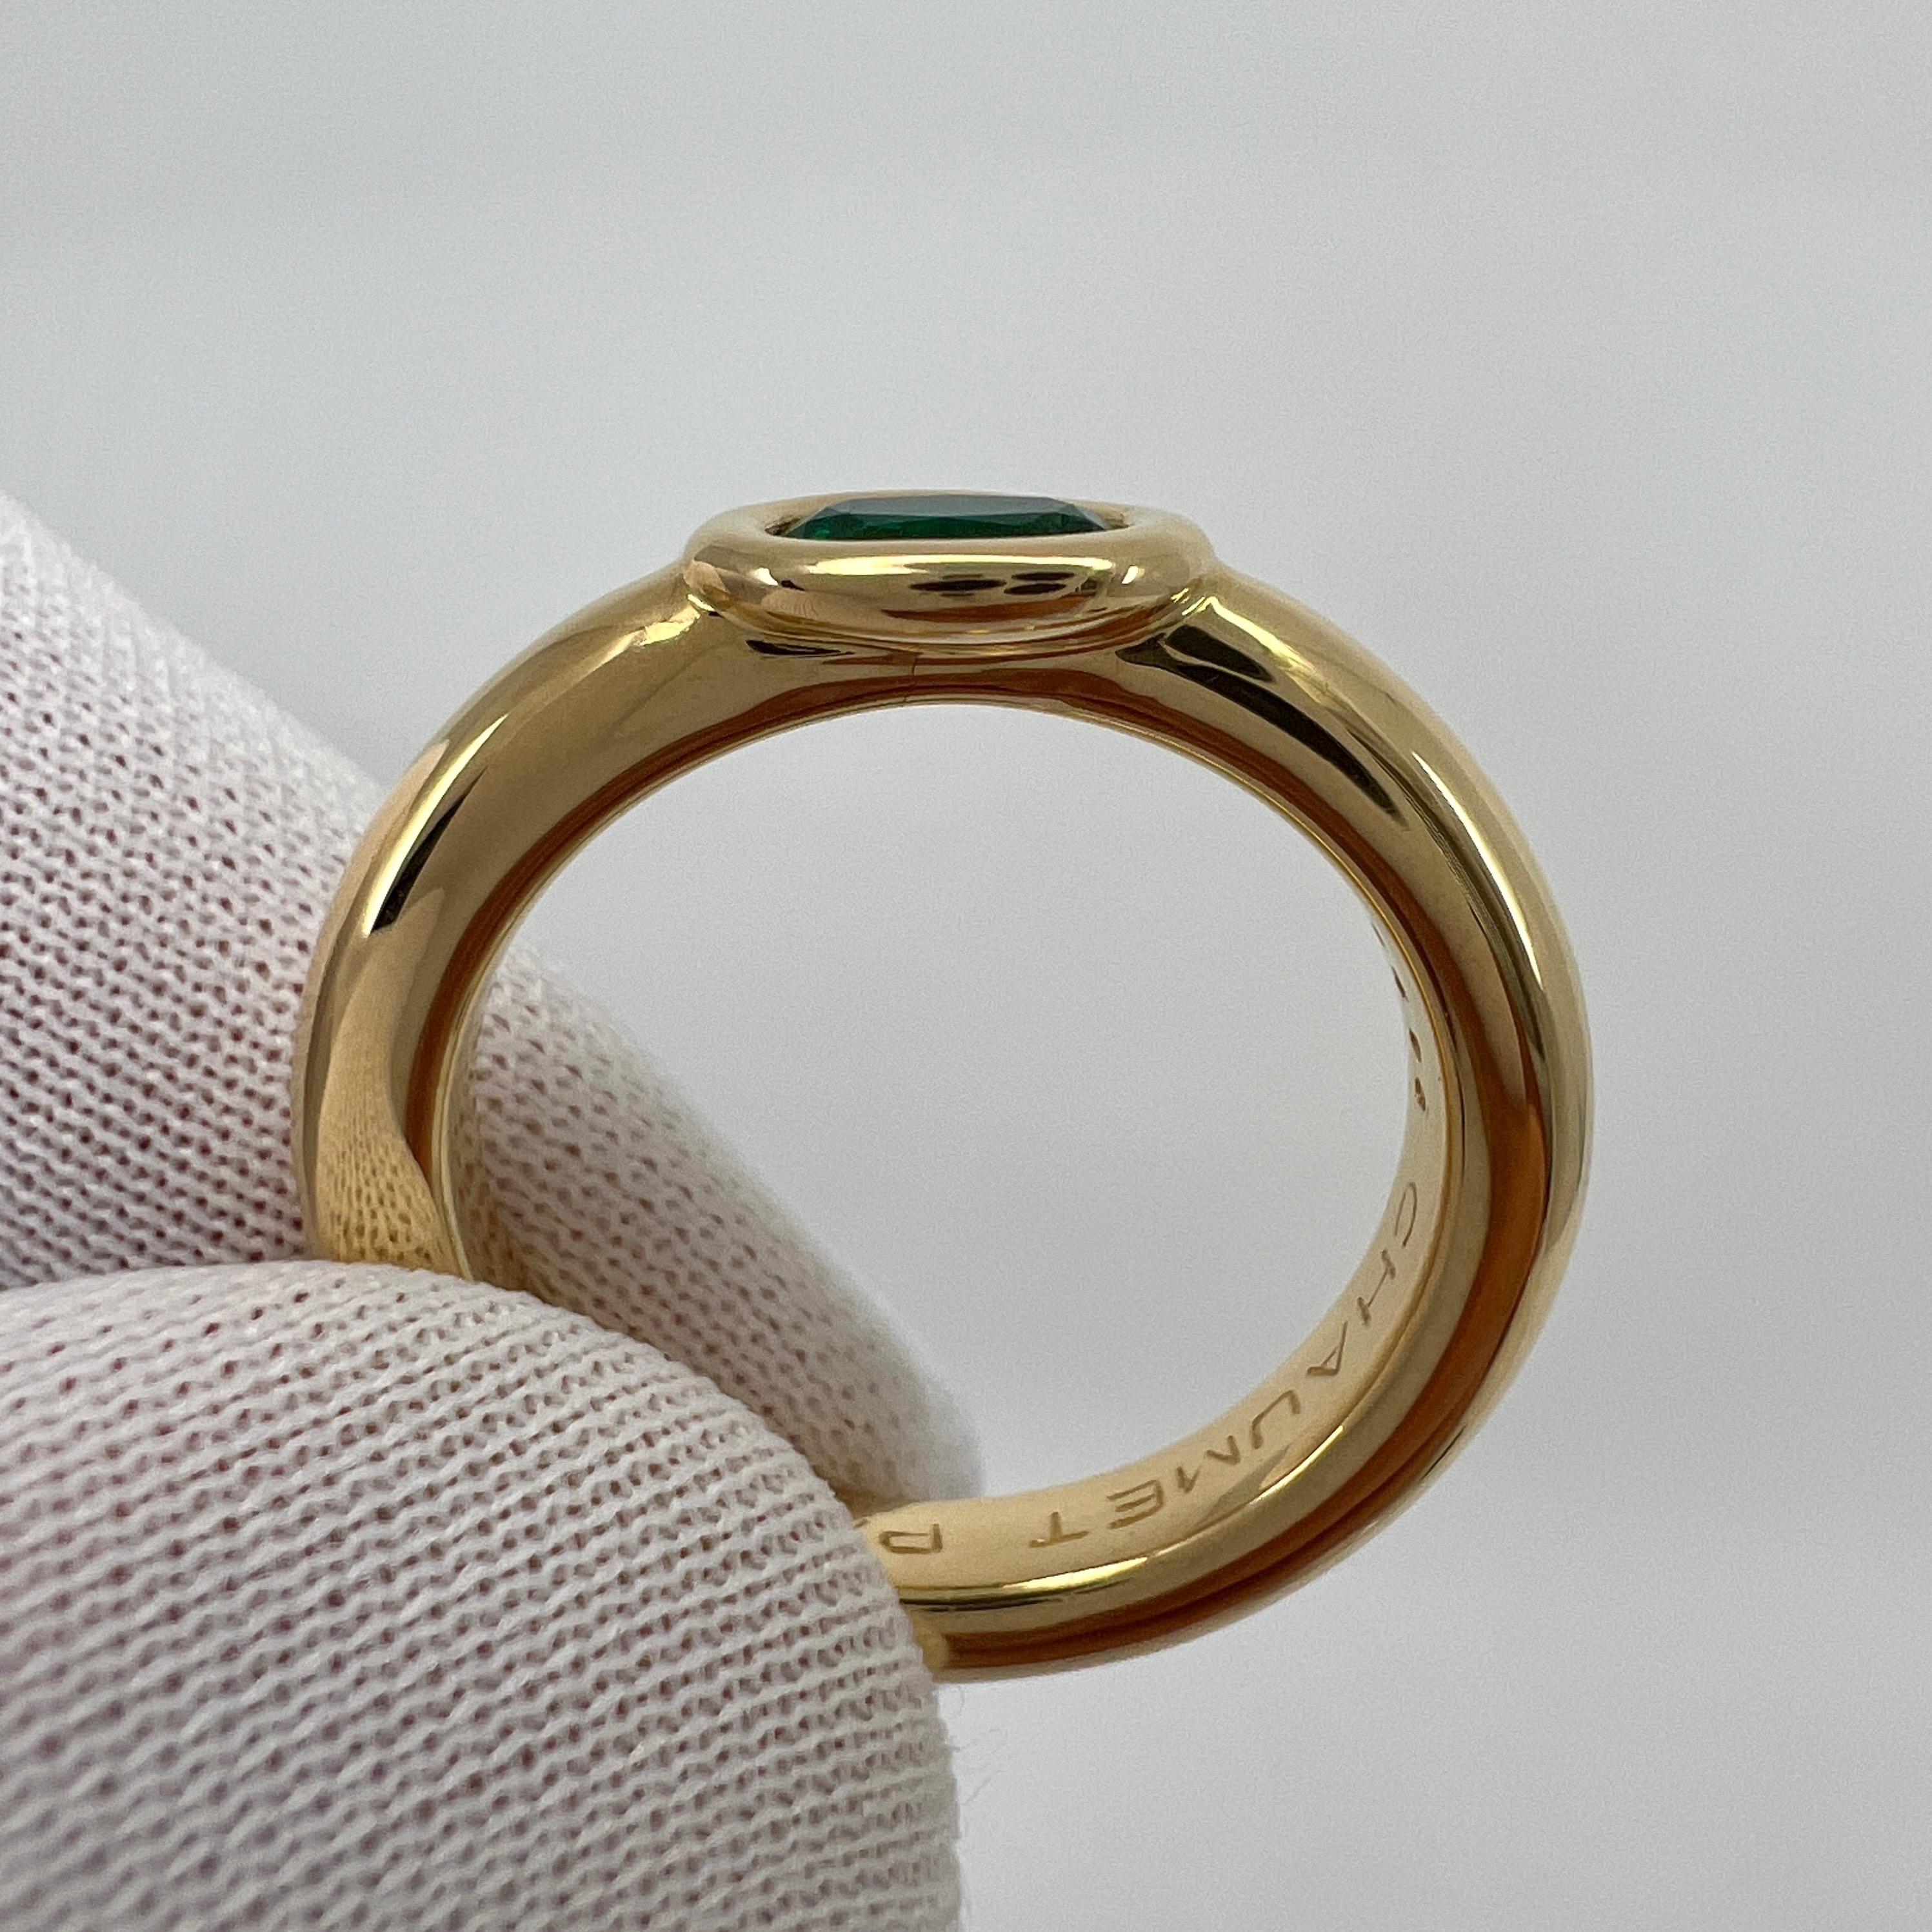 Vintage Chaumet Vivid Green Emerald 18k Yellow Gold Bezel Set Rubover Solitaire Ring.

Stunning yellow gold ring set with a fine vivid green emerald. Fine jewellery houses like Chaumet only use the finest of gemstones and this emerald is no